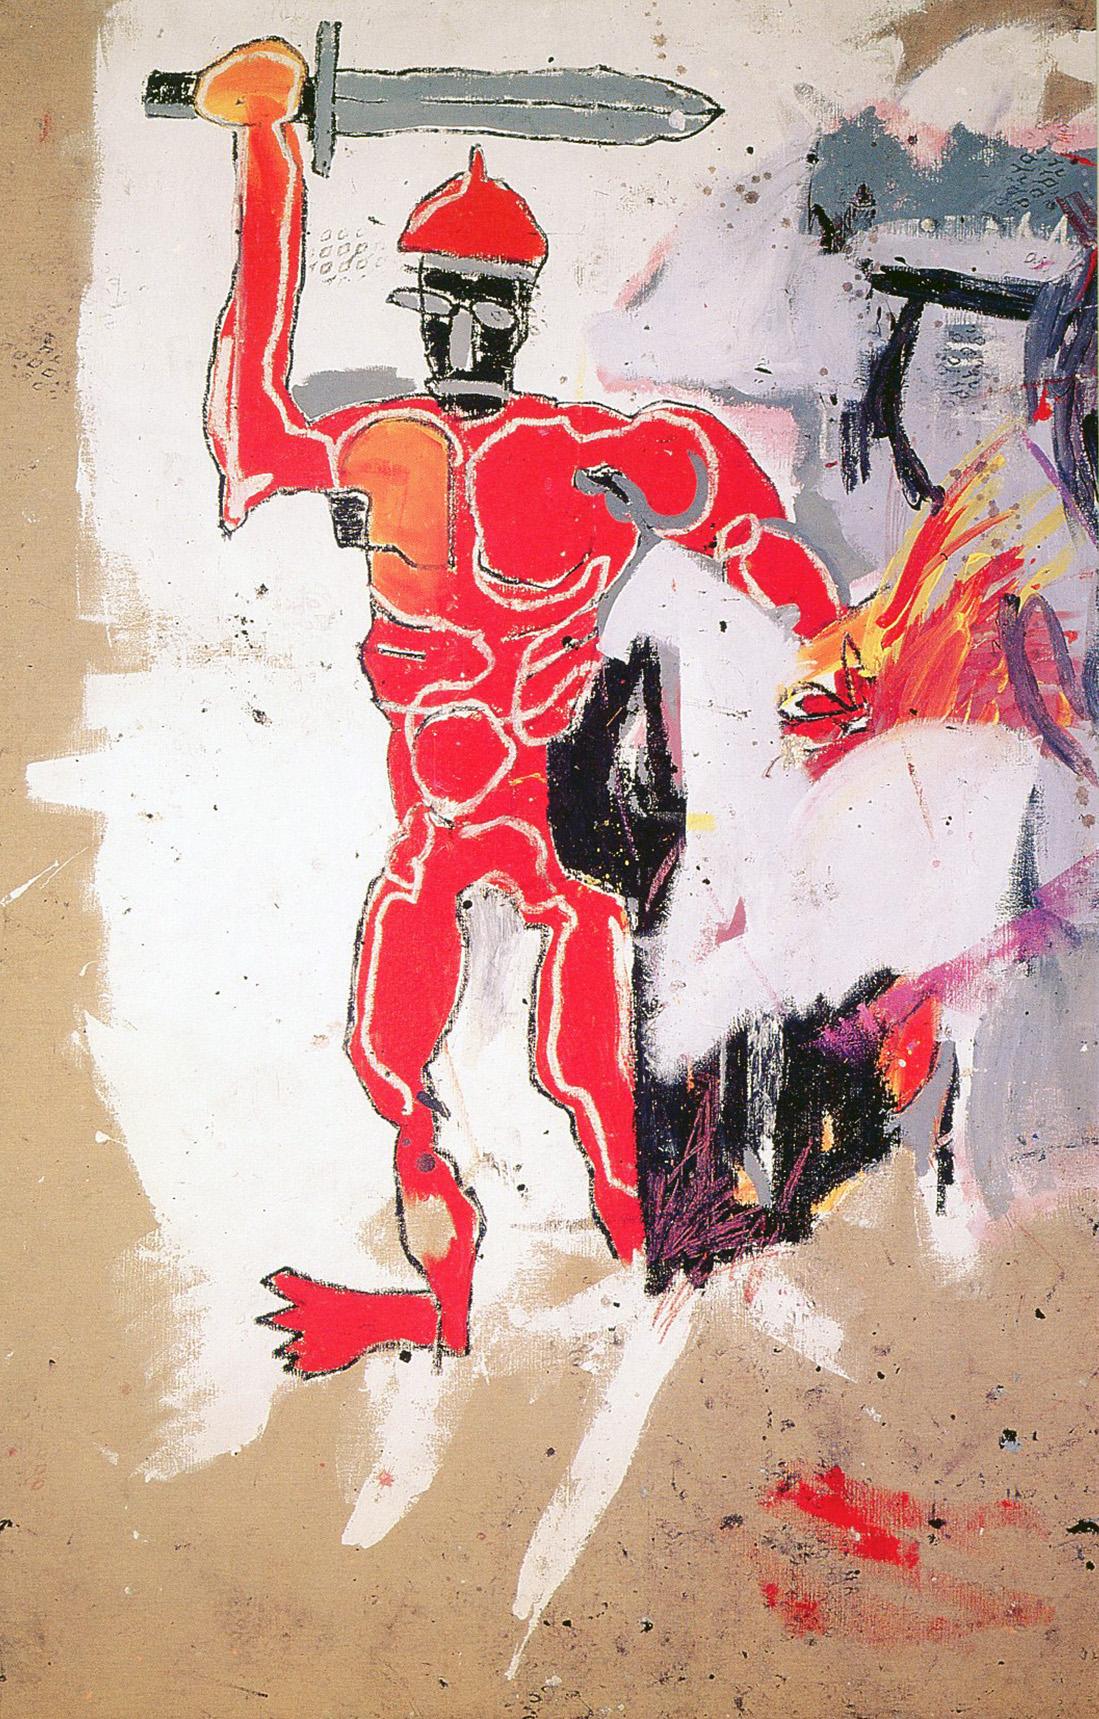 Basquiat at Vrej Baghoomian gallery 1989 (Basquiat Red Warrior announcement)  - Pop Art Print by after Jean-Michel Basquiat